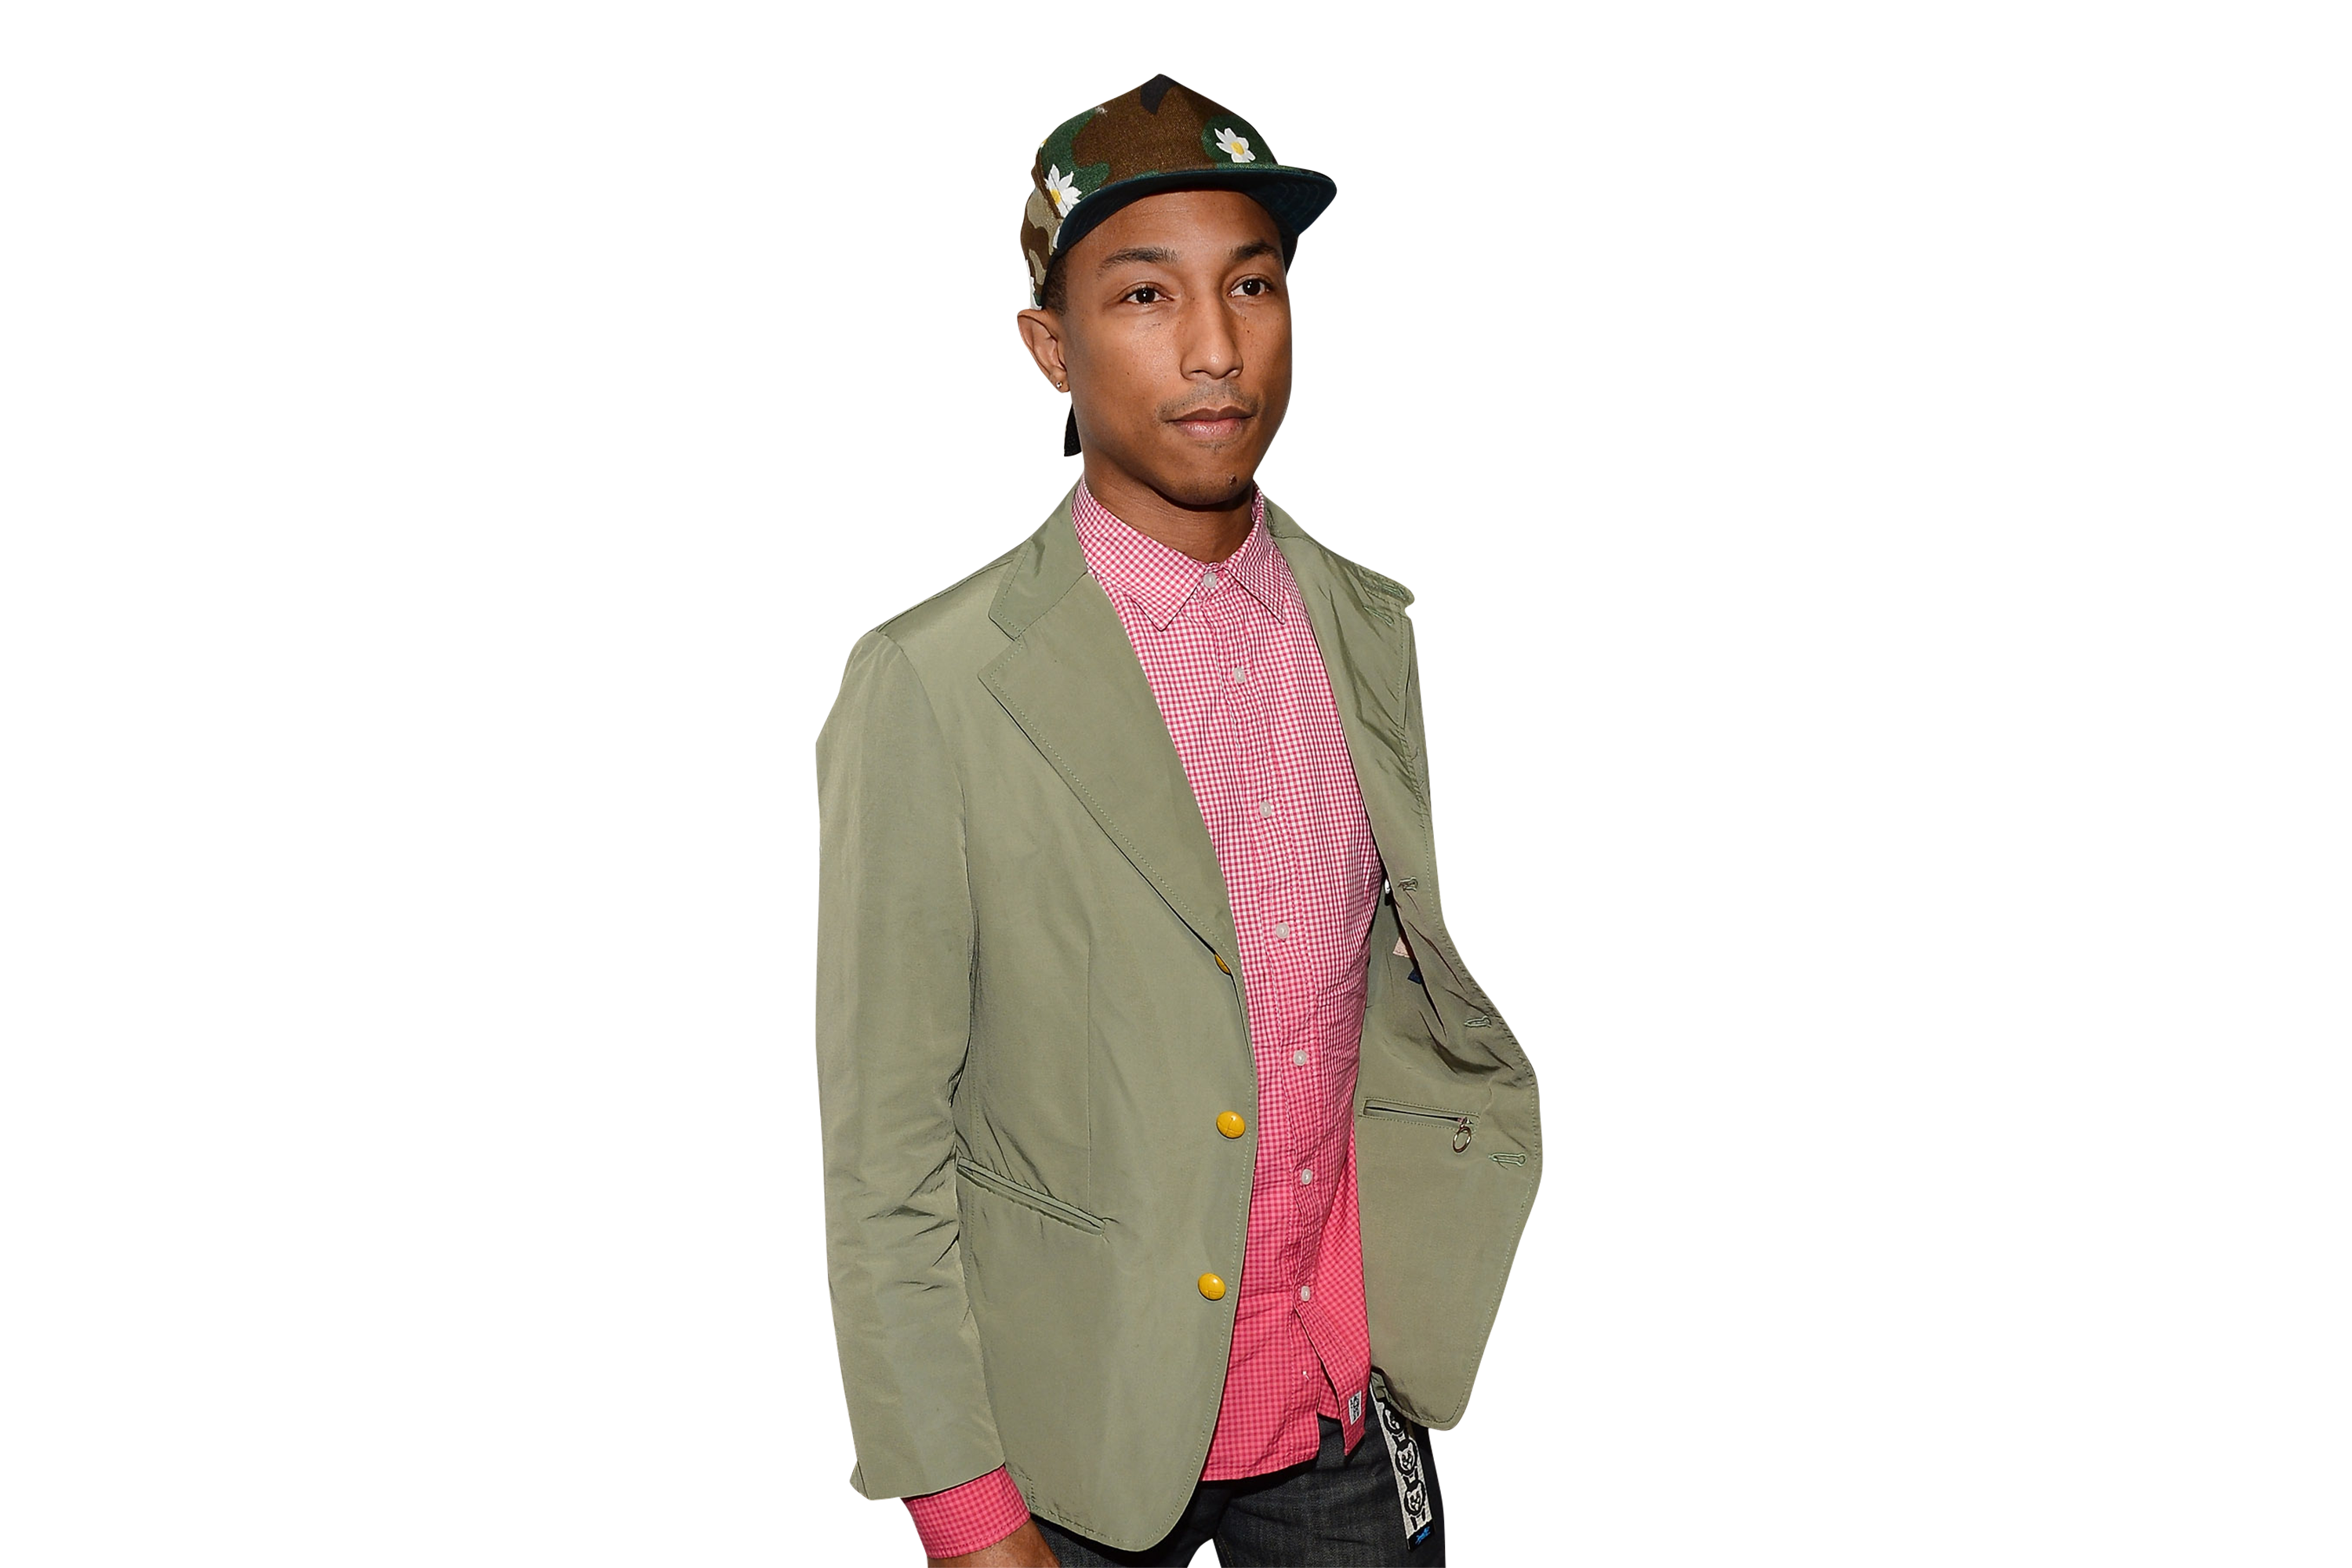 Now Pharrell is getting his o